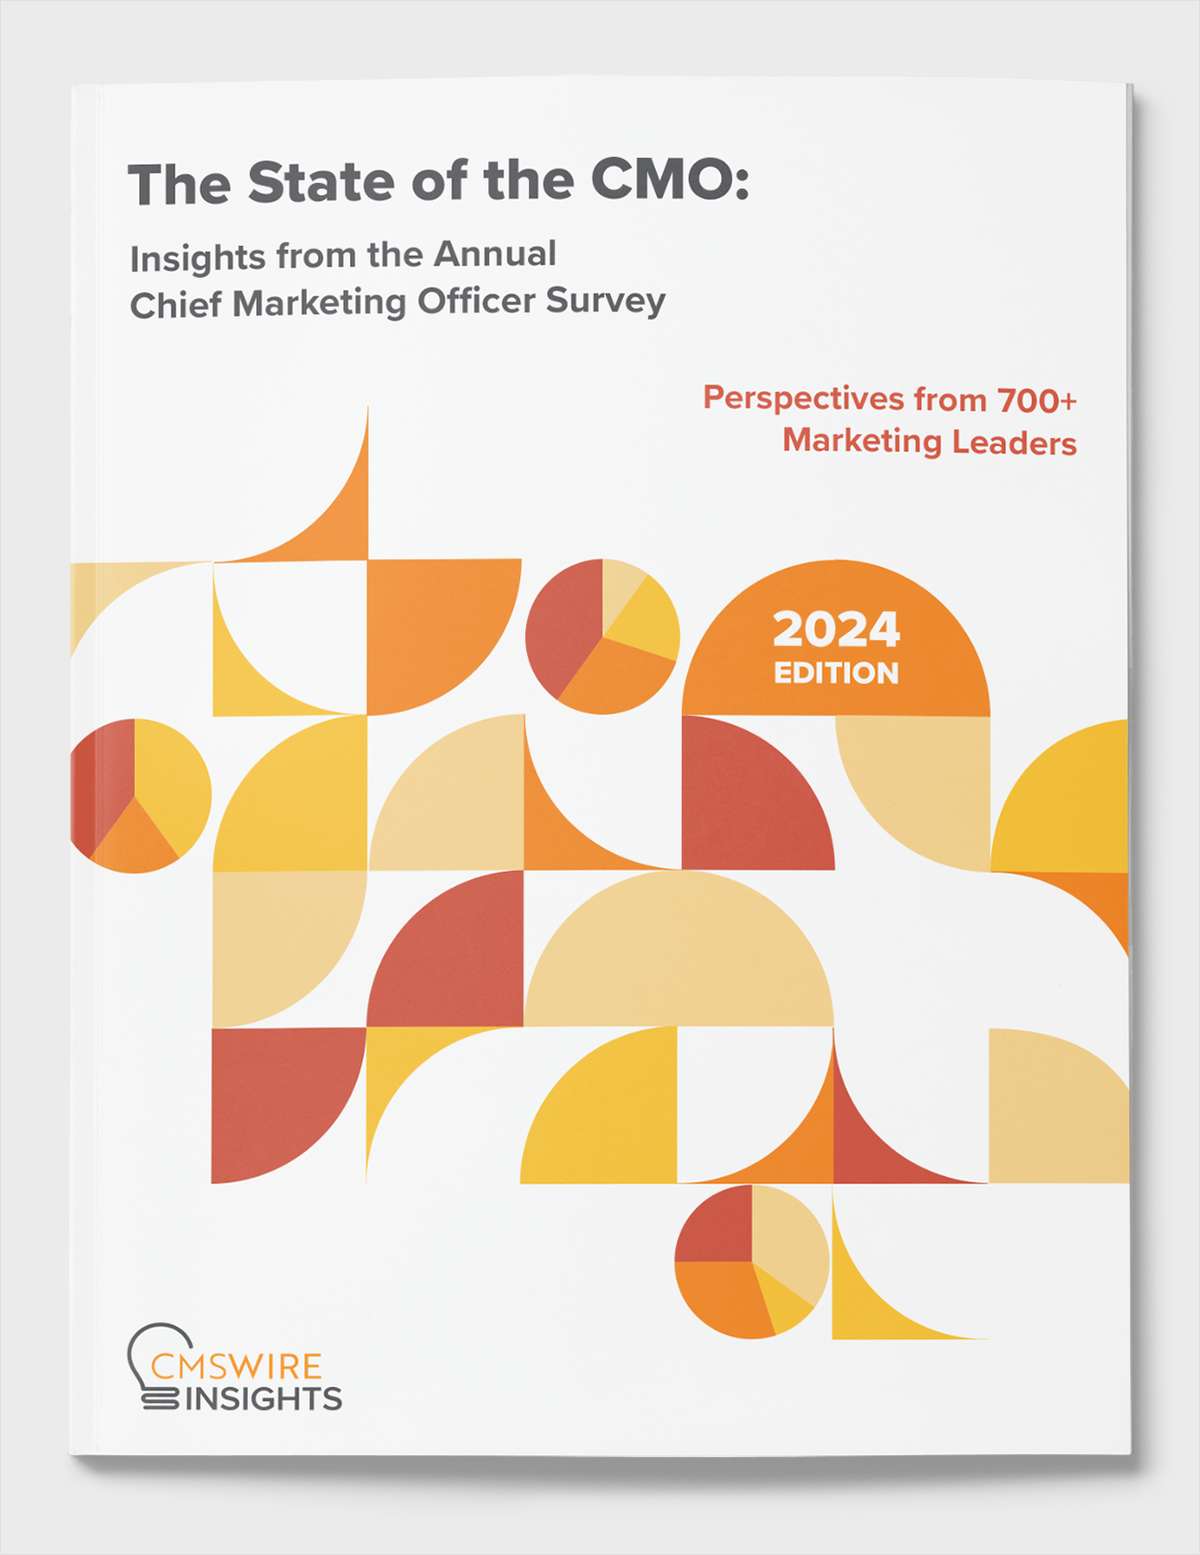 The State of the CMO